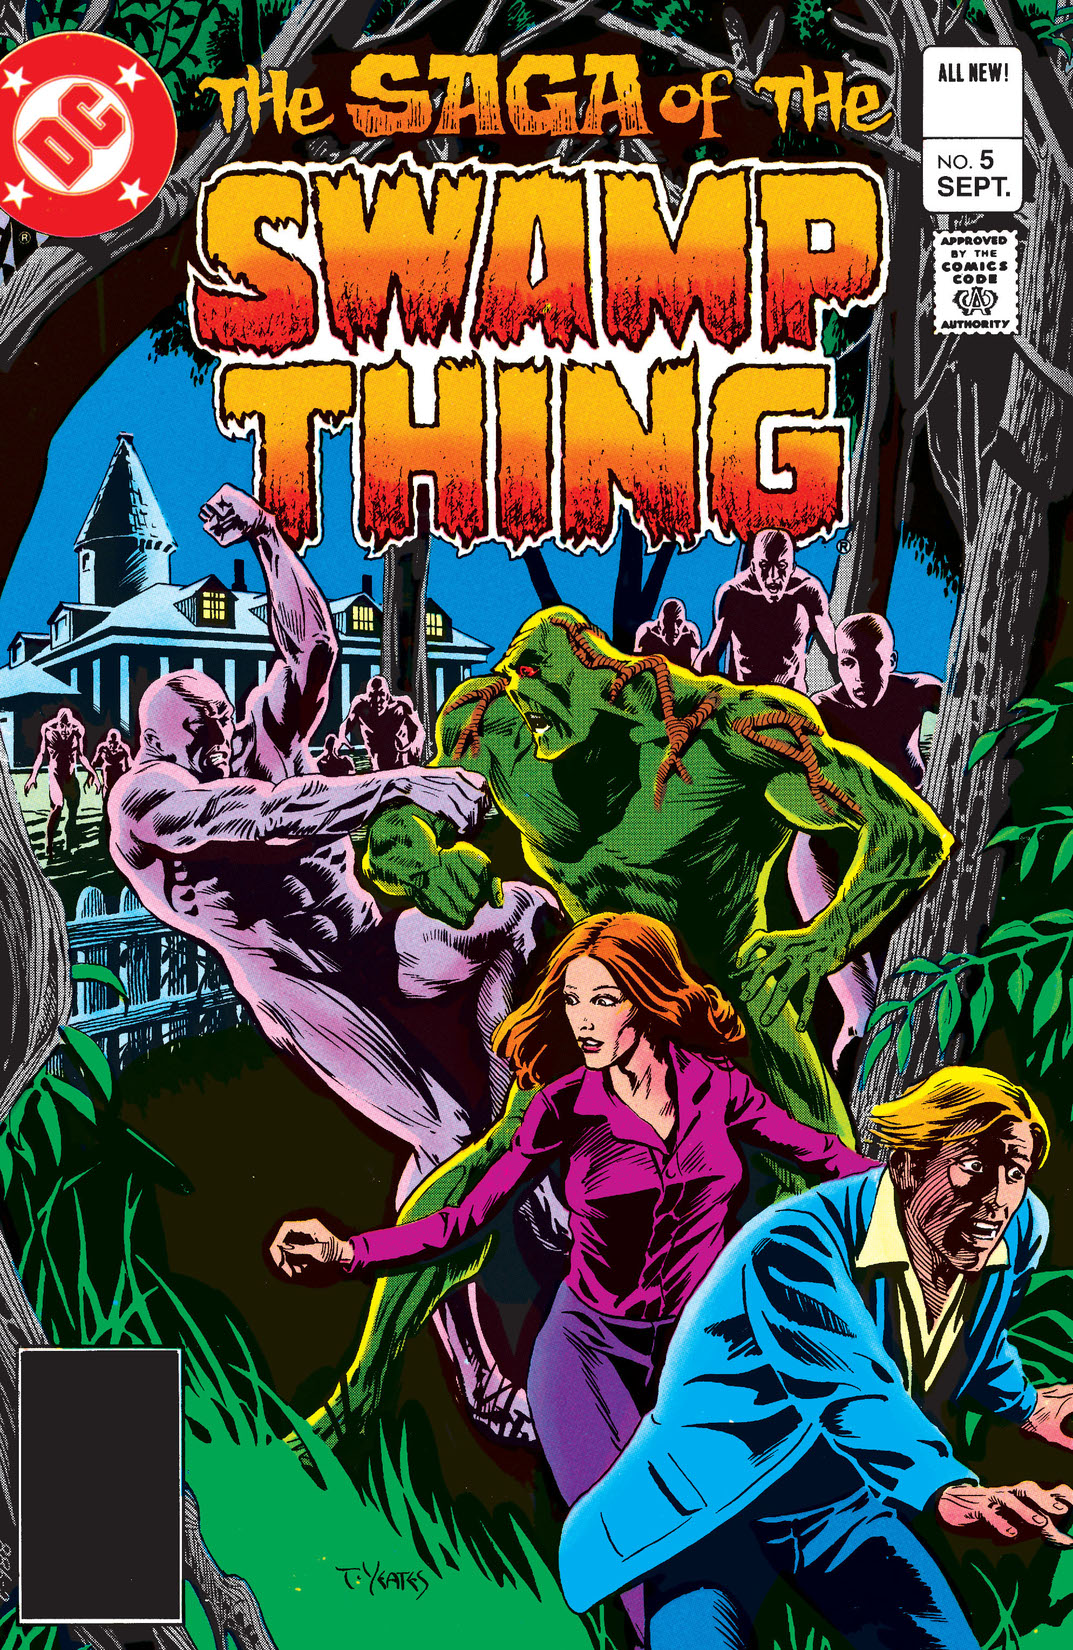 The Saga of the Swamp Thing (1982-) #5 preview images